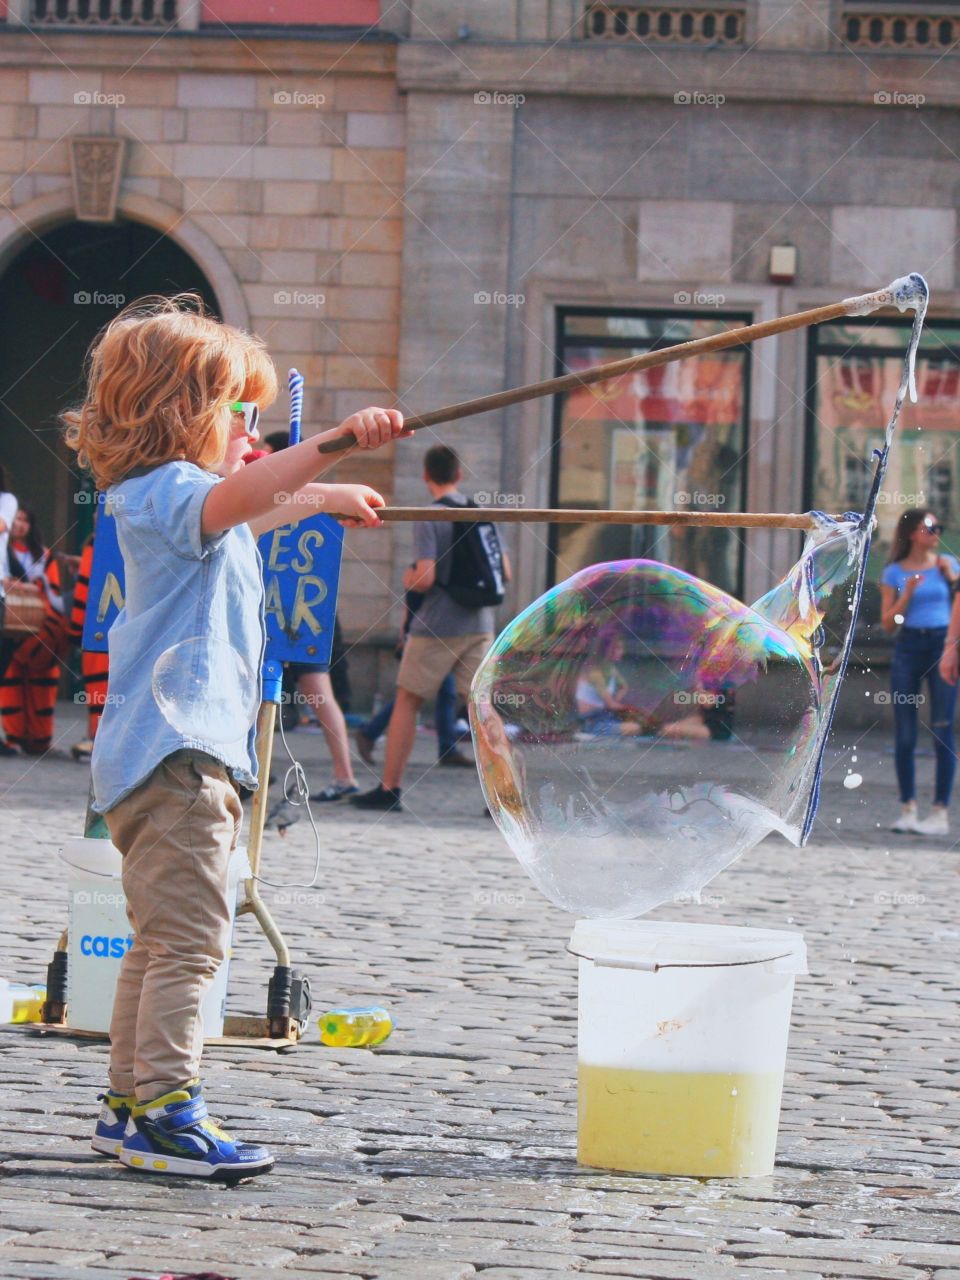 Meet a little bubble master! This boy is really talented.